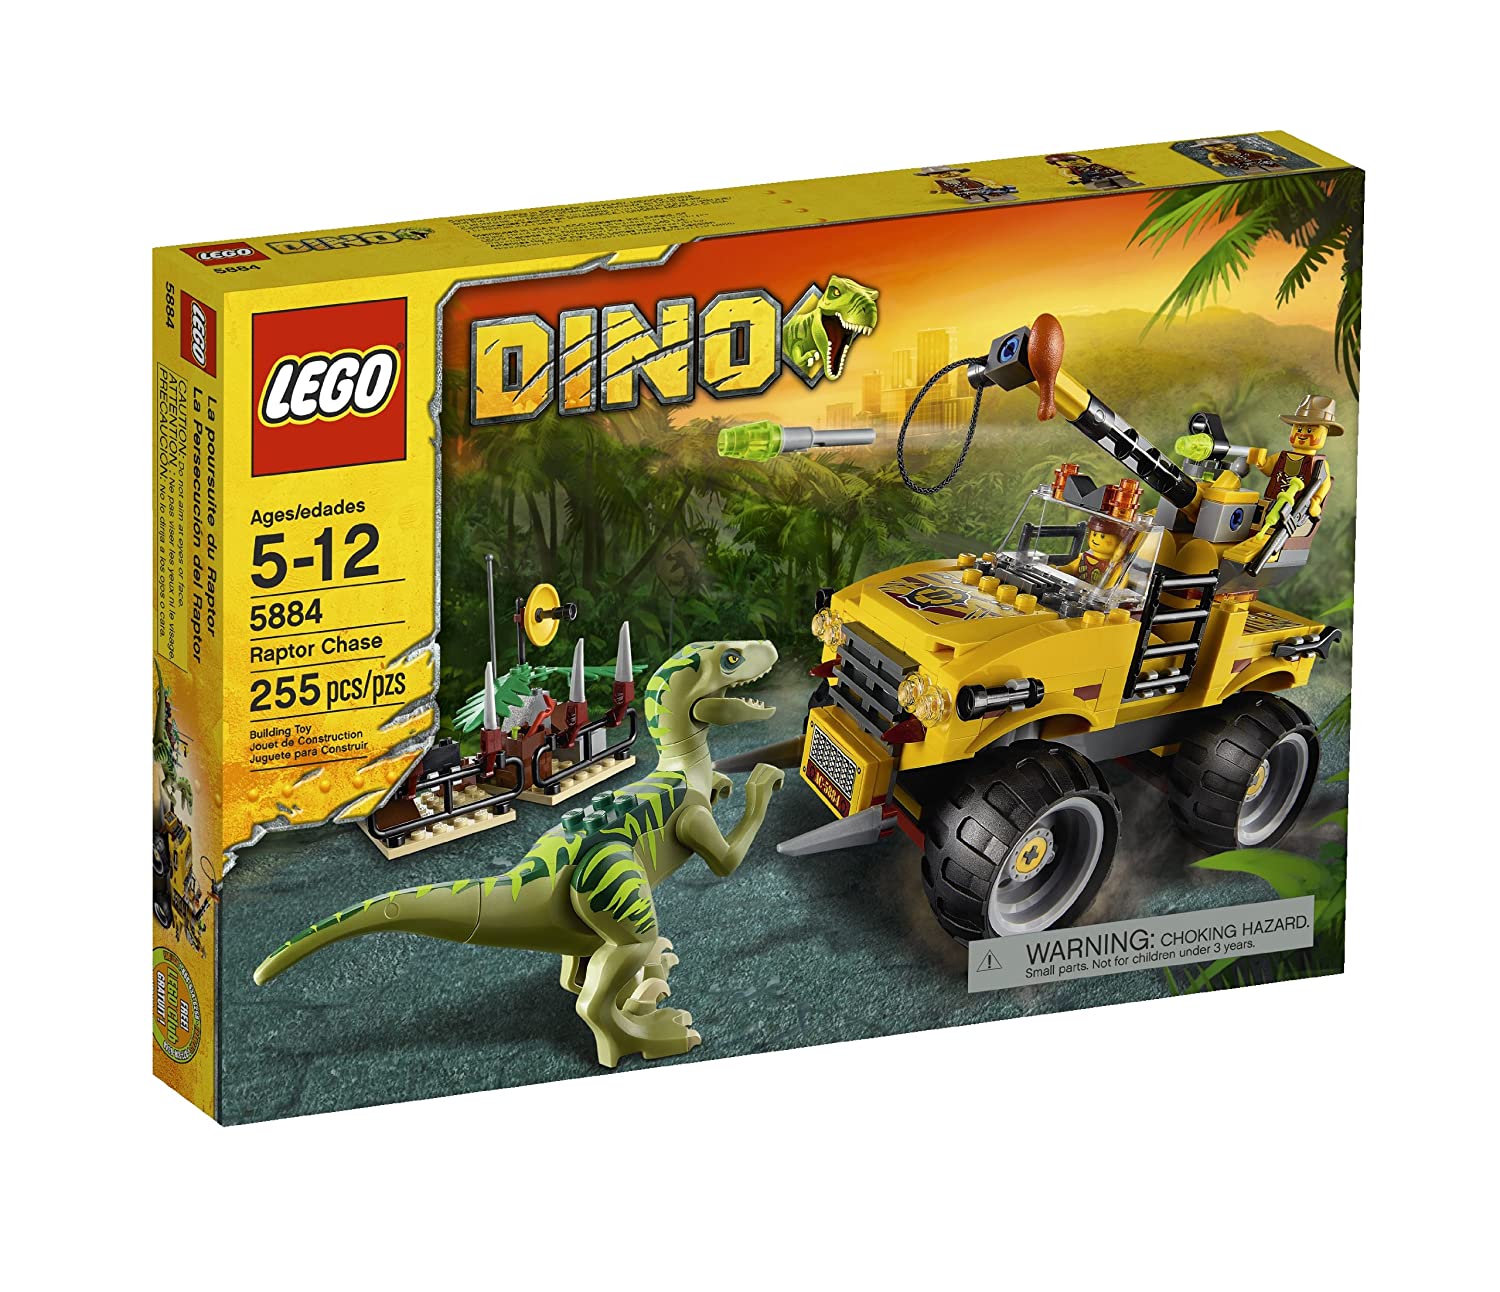 Top 8 Best Lego Dinosaurs Set Reviews in 2022 5